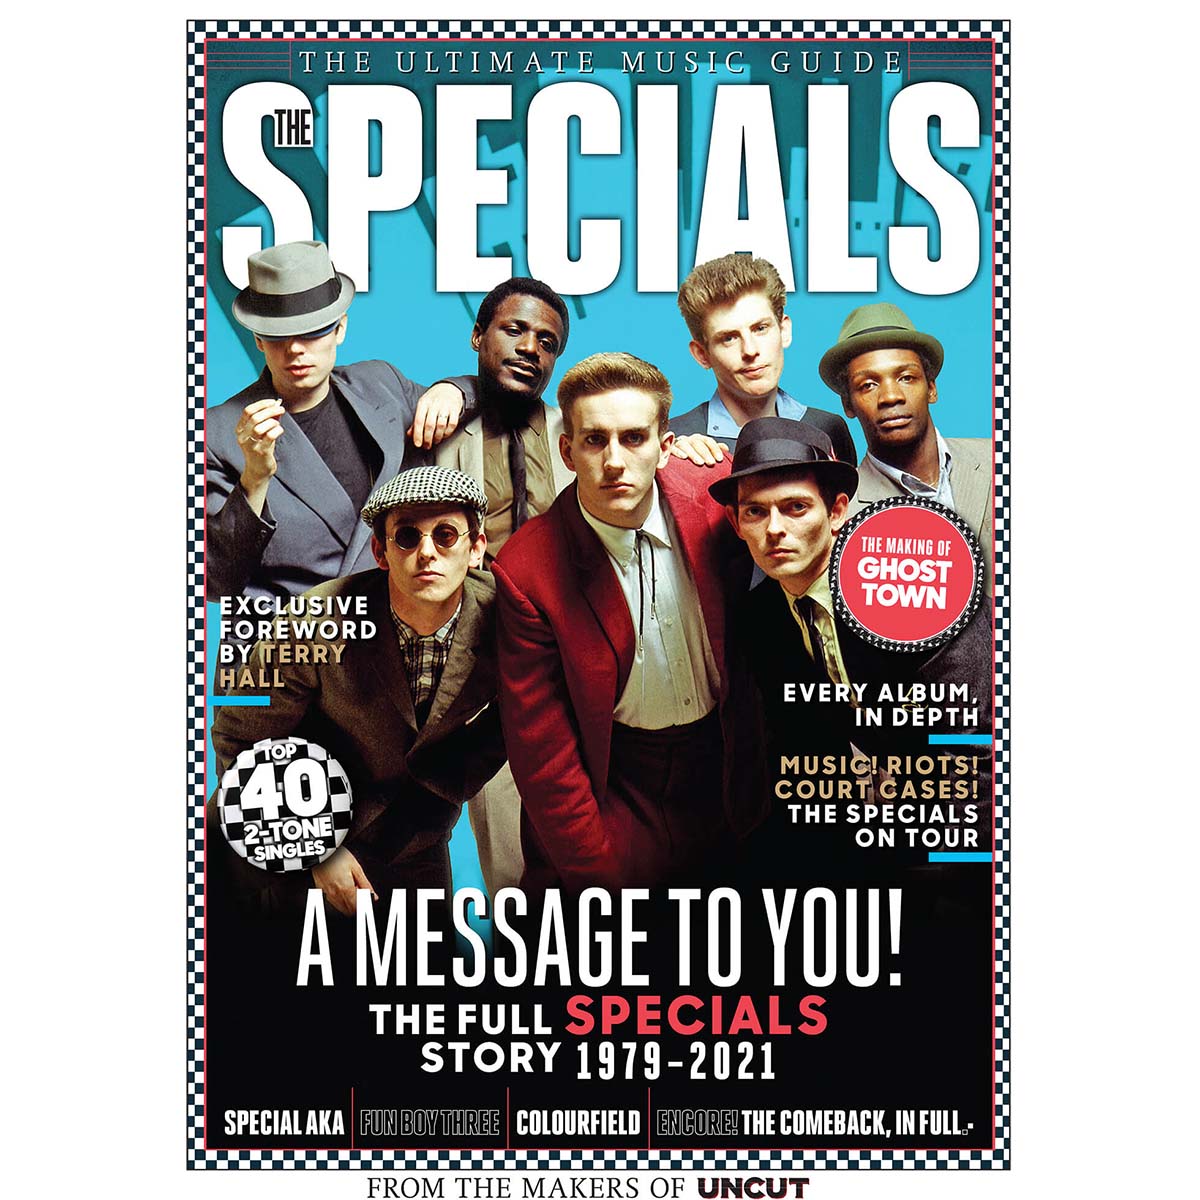 Uncut Magazine - Ultimate Music Guide: The Specials (September 2021)